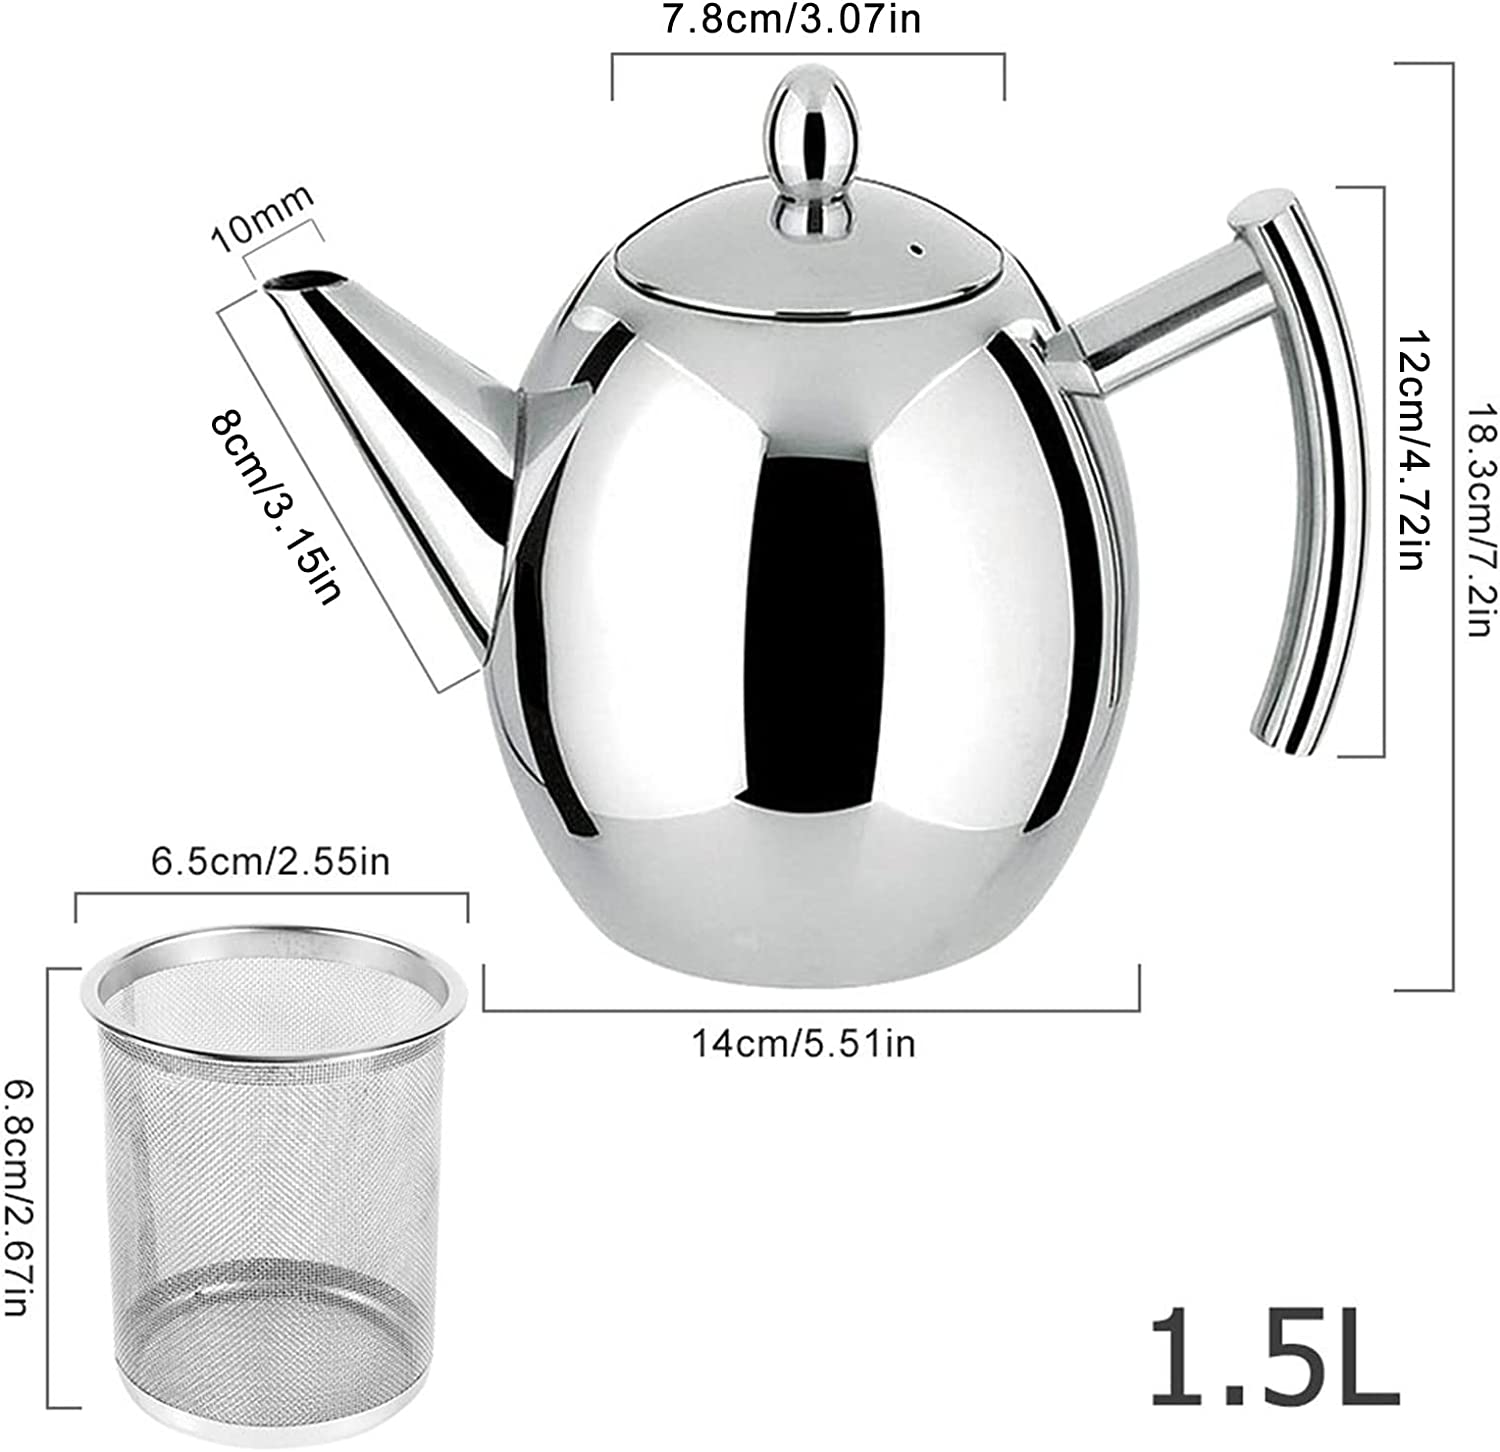 1.5 l Stainless Steel Teapot, Teapot with Strainer Insert, Double-Walled Teapot, Dishwasher Safe, Handmade Tea Pot